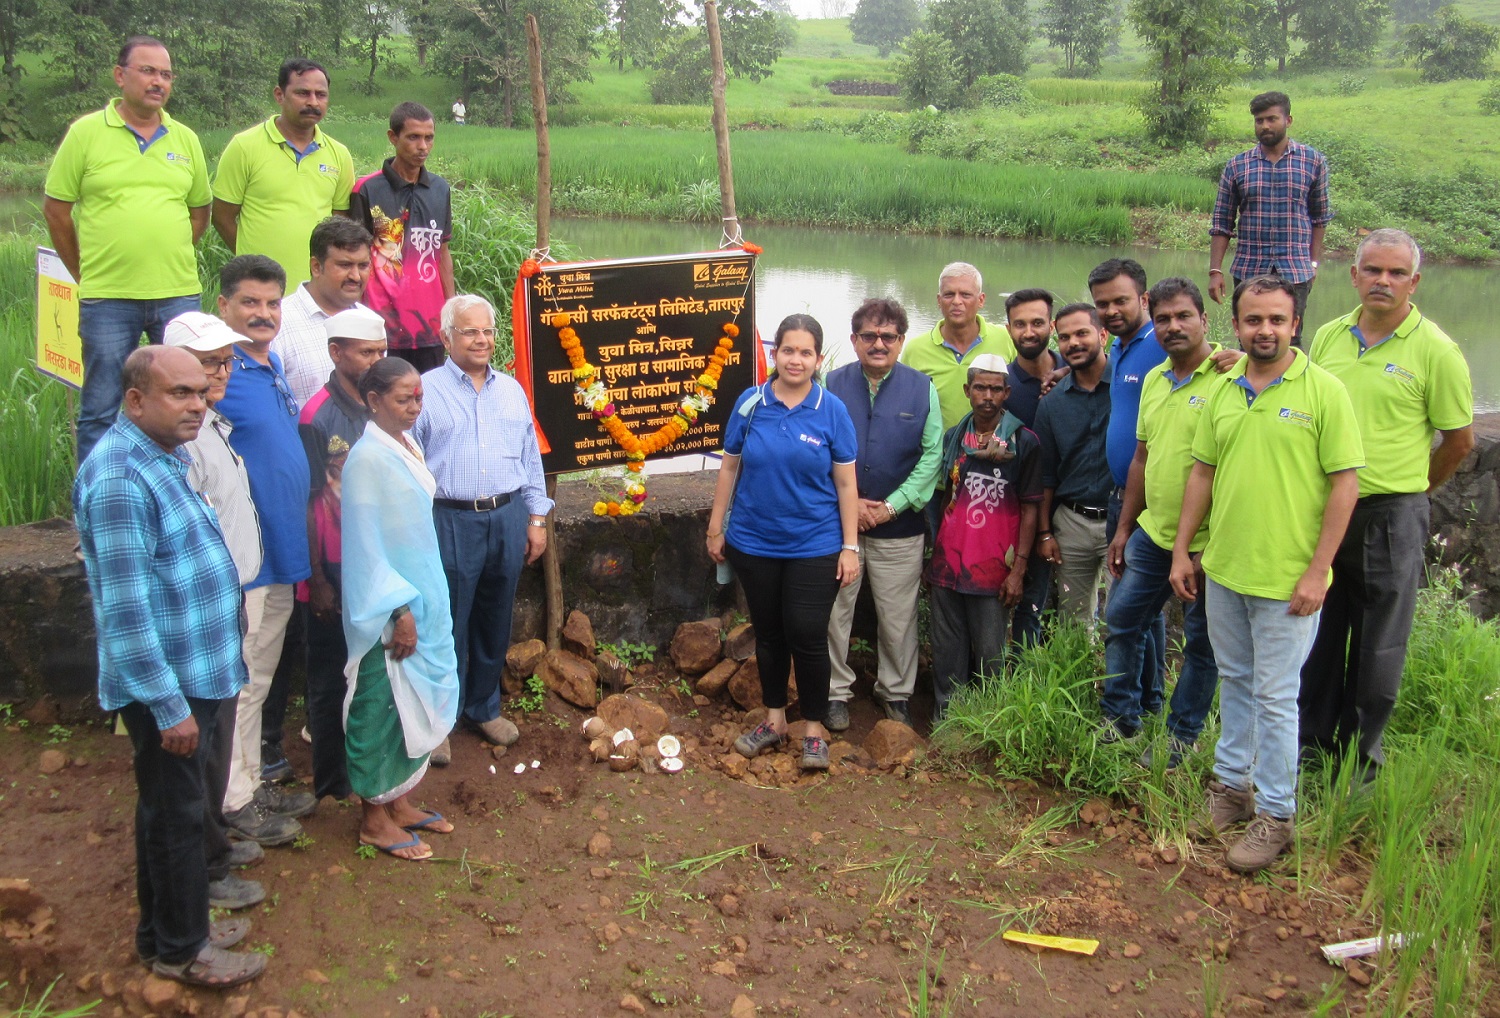 Mr U. Shekhar, Founder and Managing Director, Galaxy Surfactants Limited along with the employees of the company at the inaugural ceremony of check-dam in Kelichapada, Jawhar and Rajewadi village, which is situated in the district of Palghar, Maharashtra.